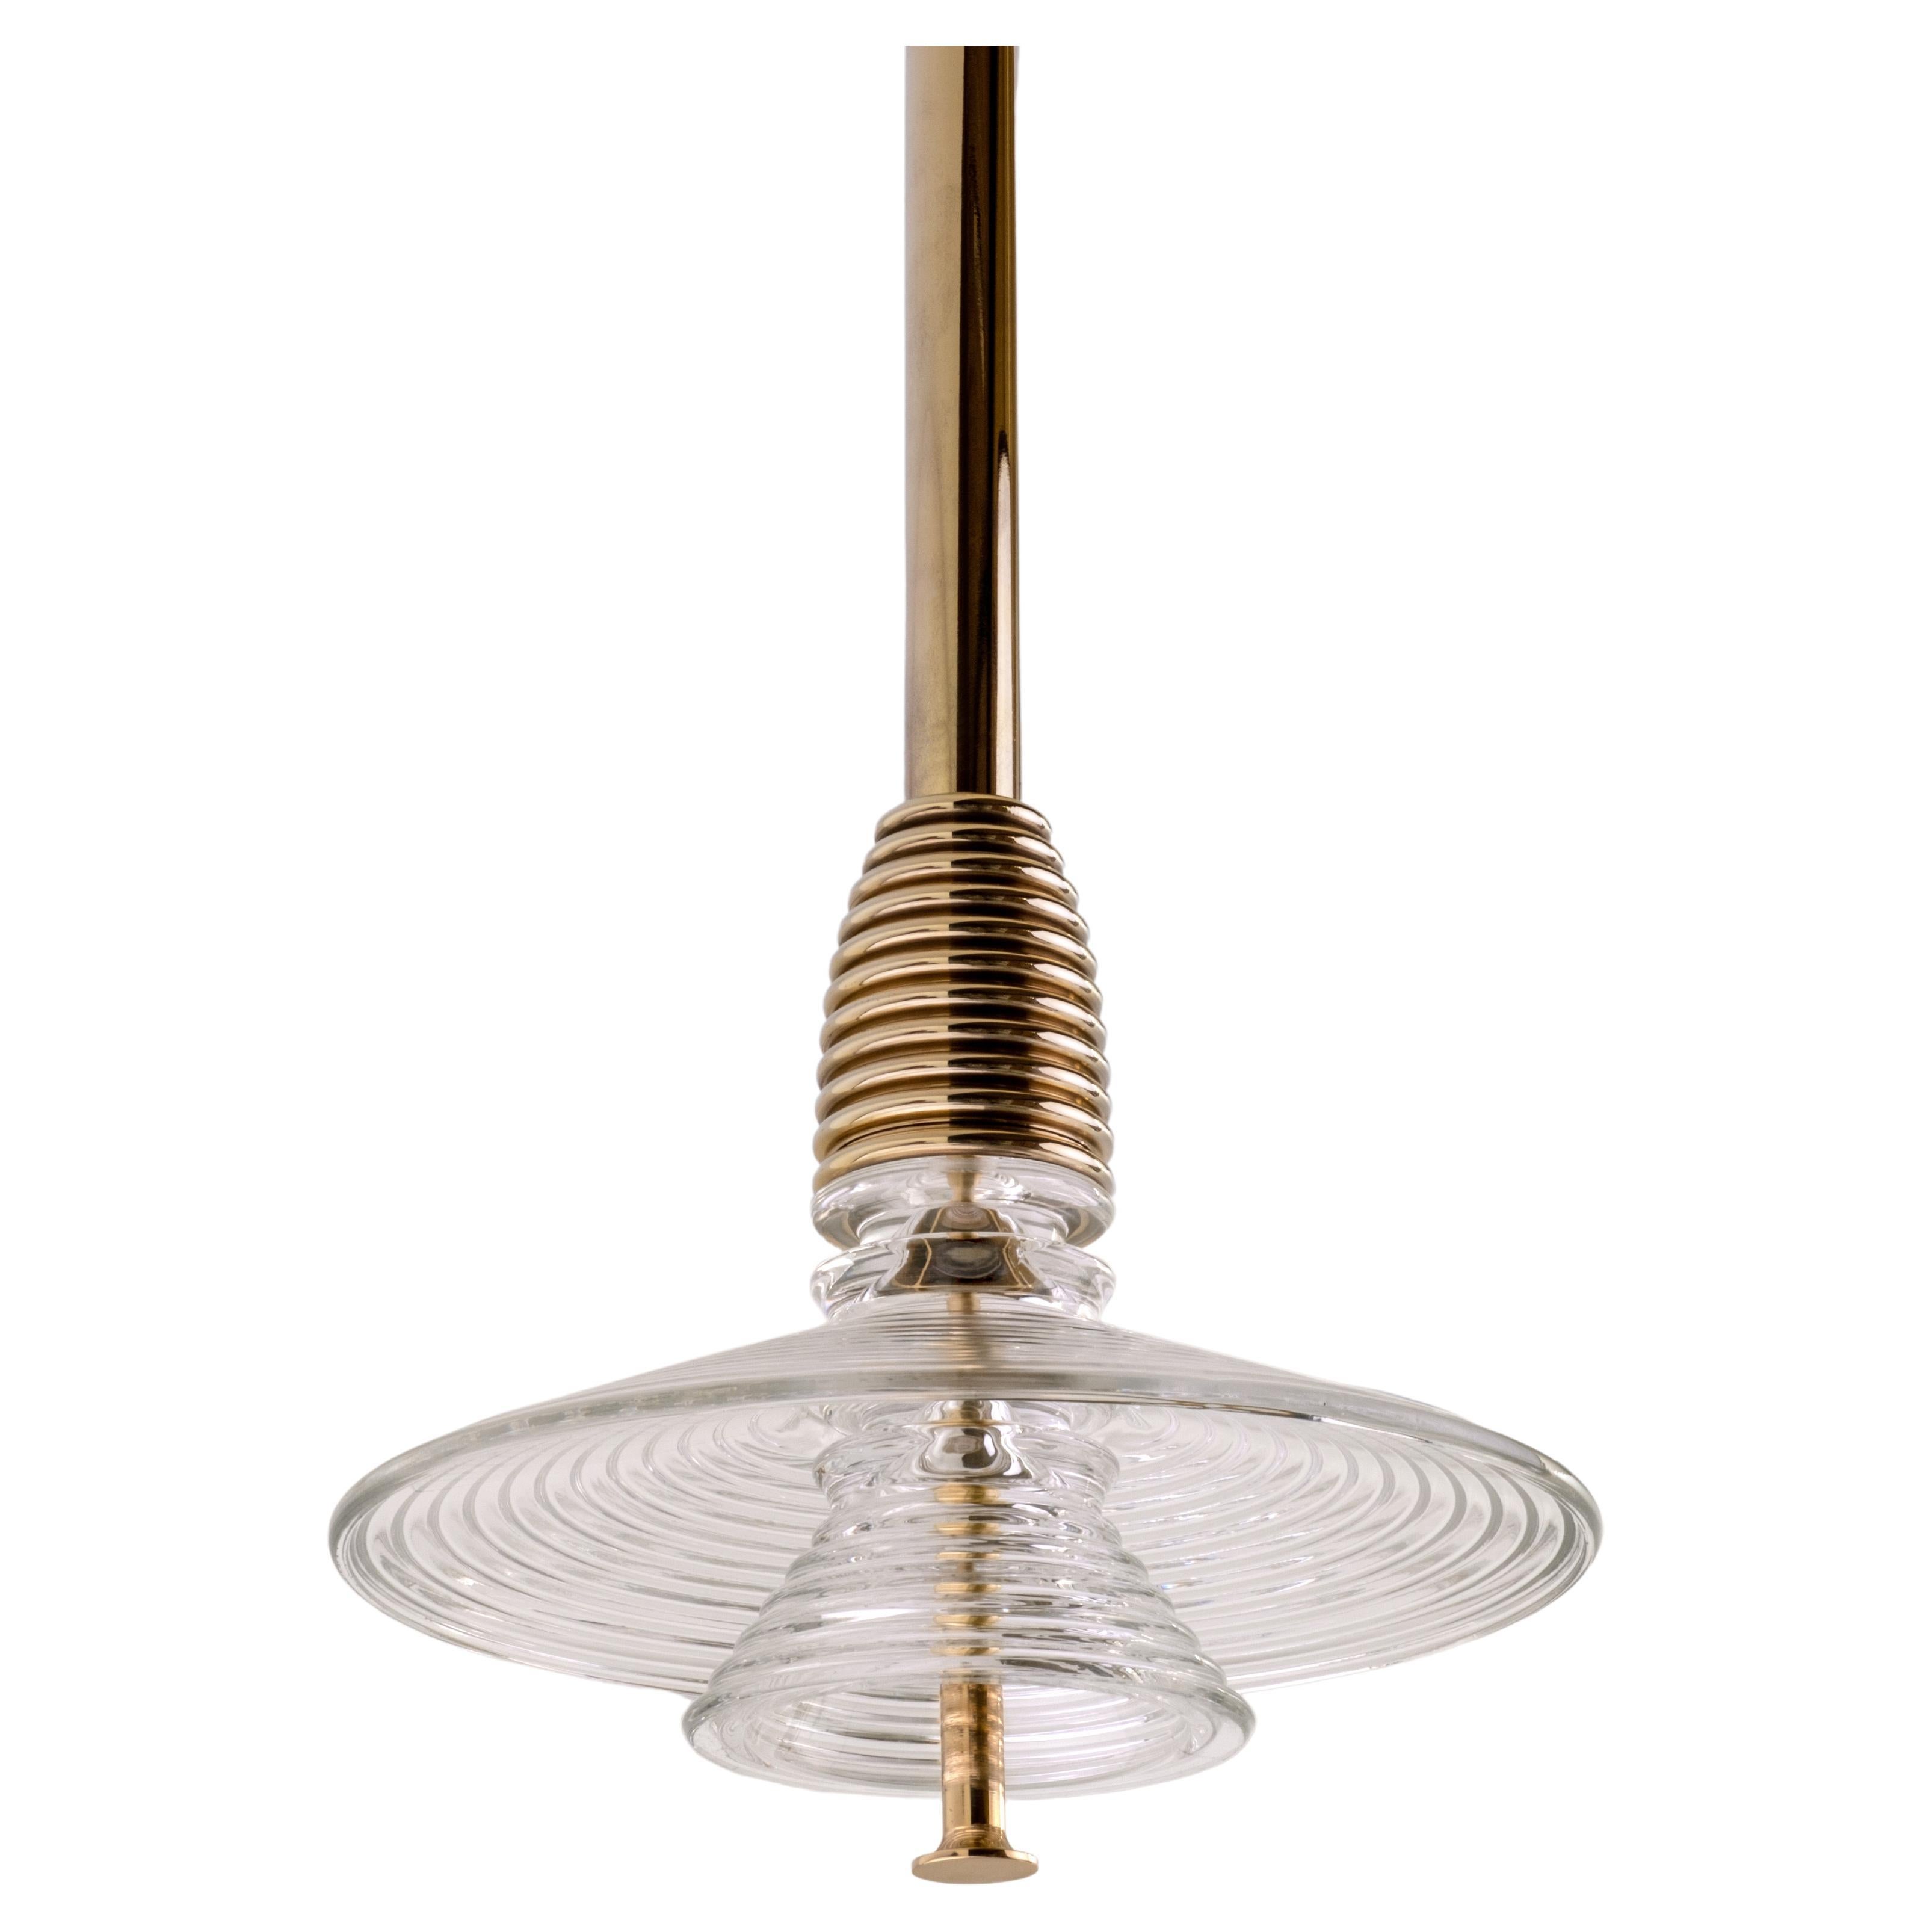 The Insulator 'AB' Pendant in polished brass and clear glass by NOVOCASTRIAN For Sale